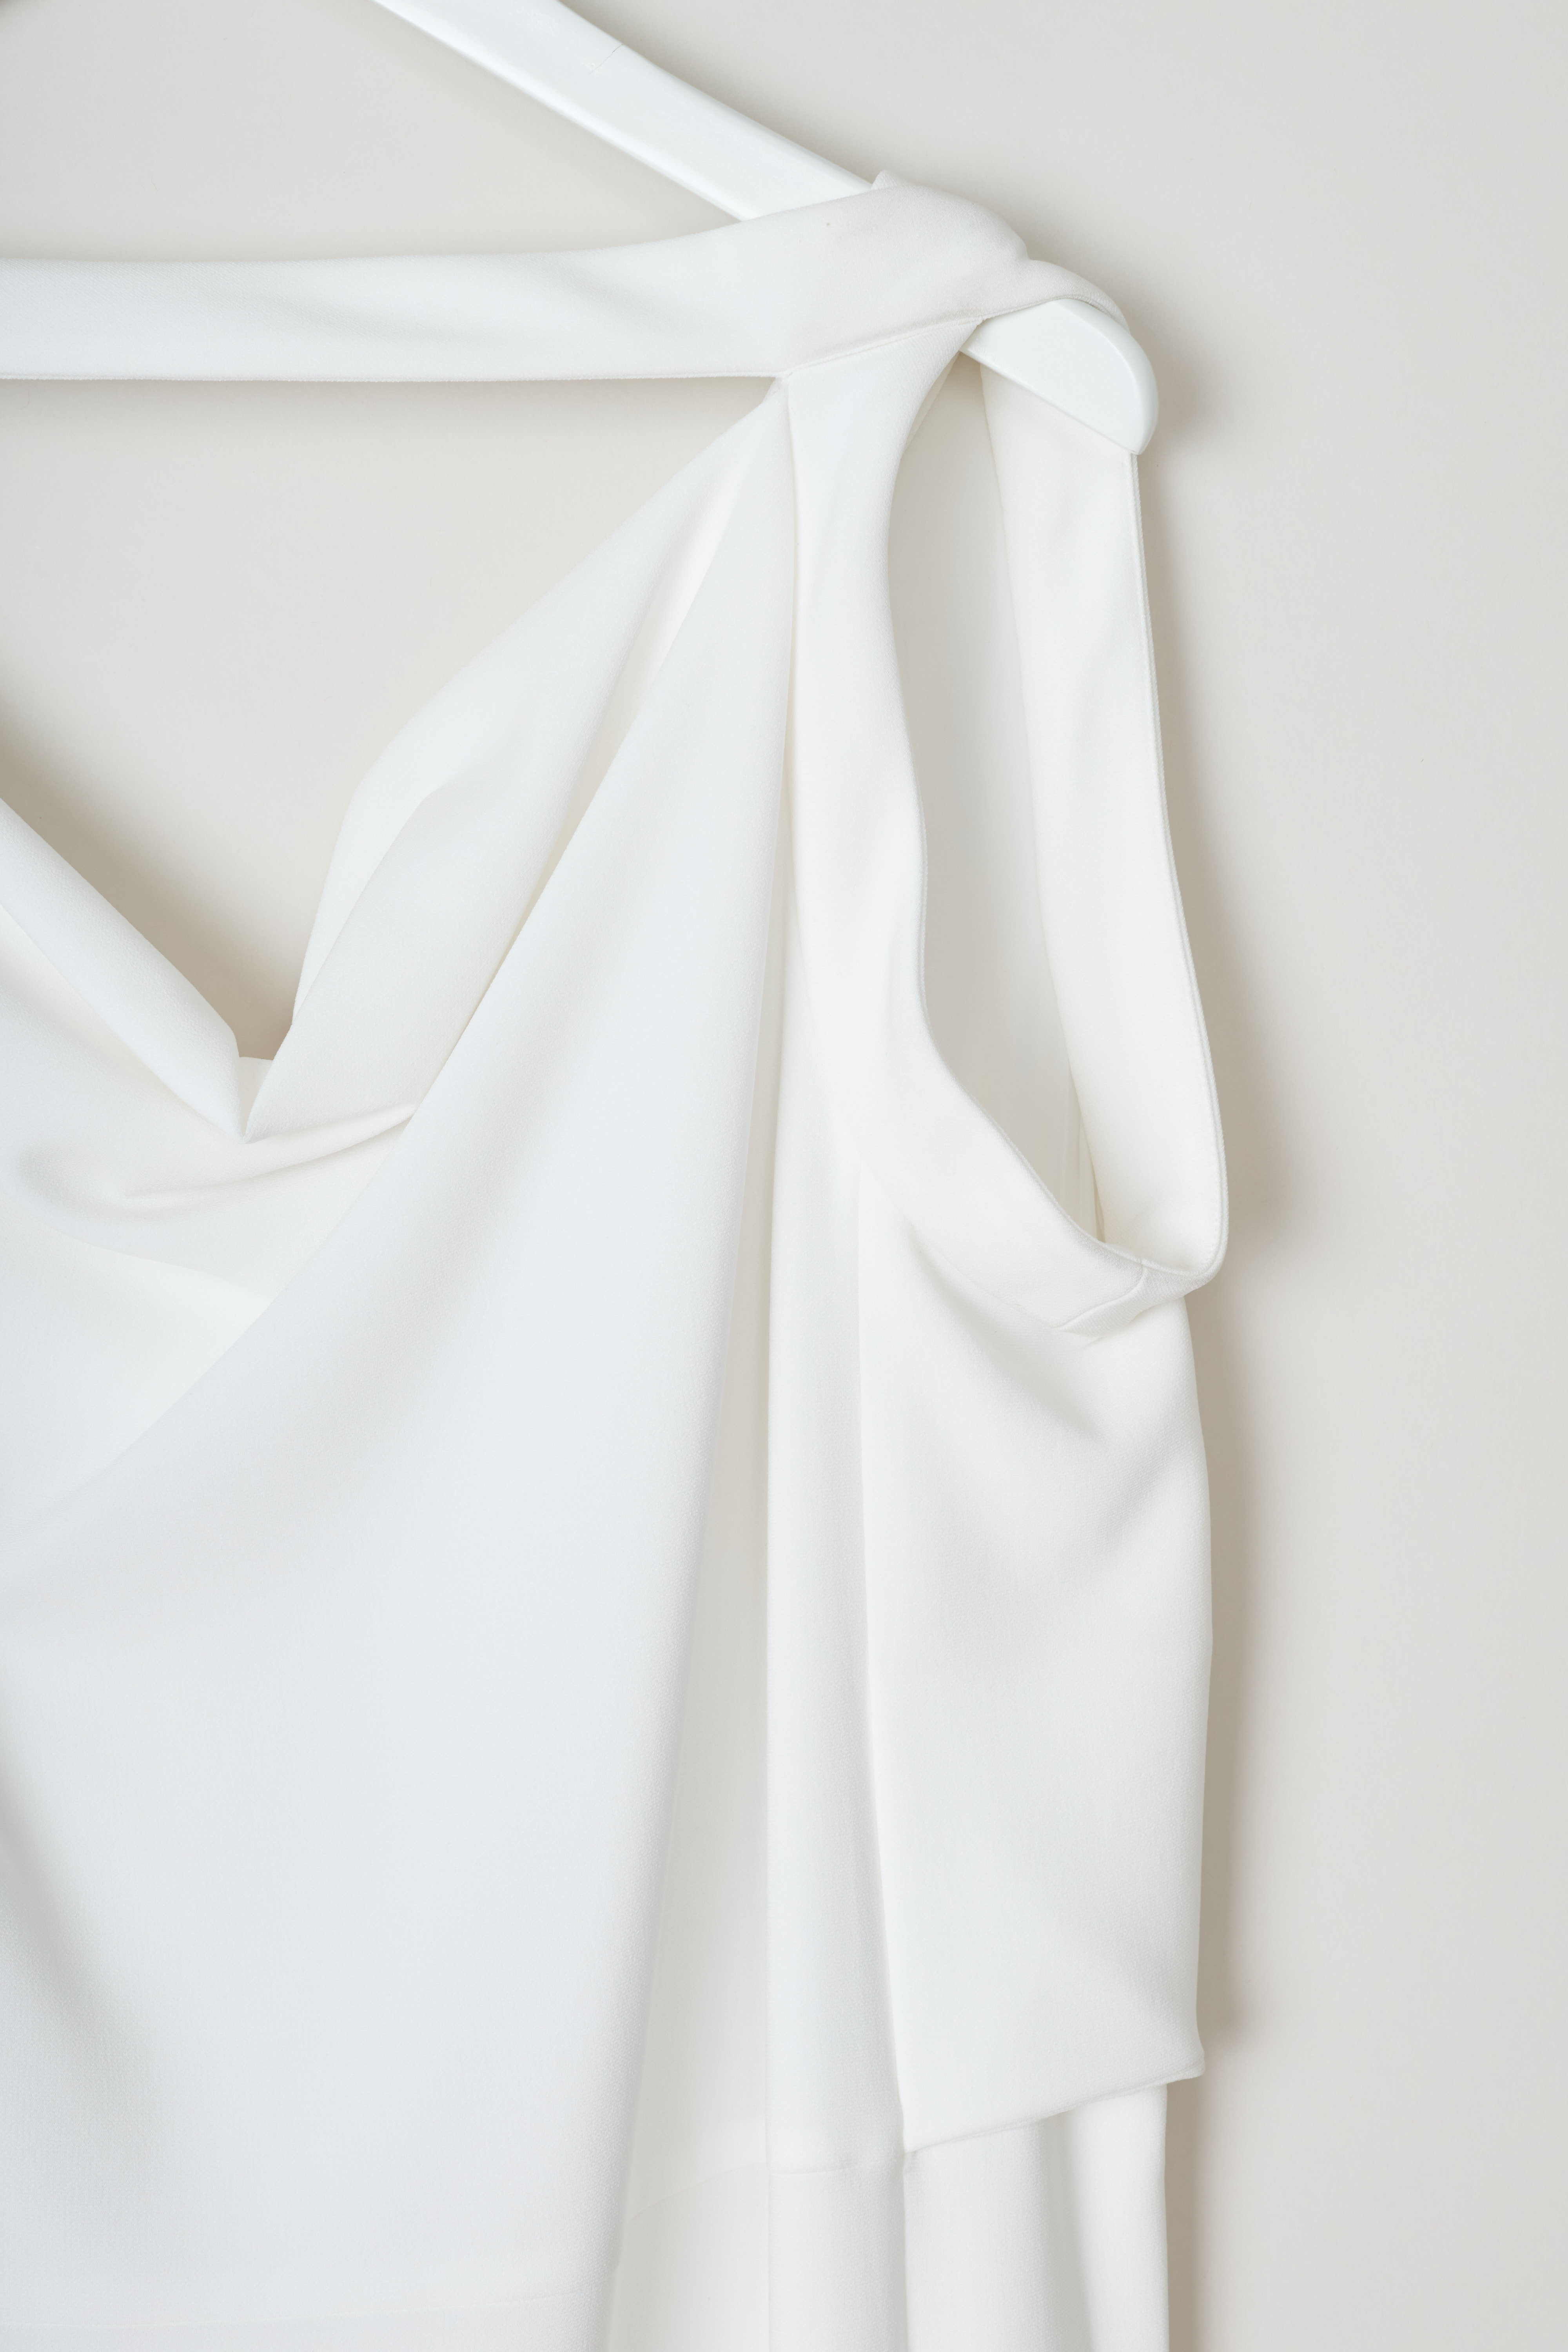 Balenciaga, Shift dress with an cowl neckline, 293704_TBDI6_9800_white, white, detail. Shift dress with a draped neckline plus ribbon on the front and an open back. Furthermore a decorative ribbon can be found on the back, which either can be tied on the back, or wrapped around to the front and tied there. Concealed pockets can be found on the front. 